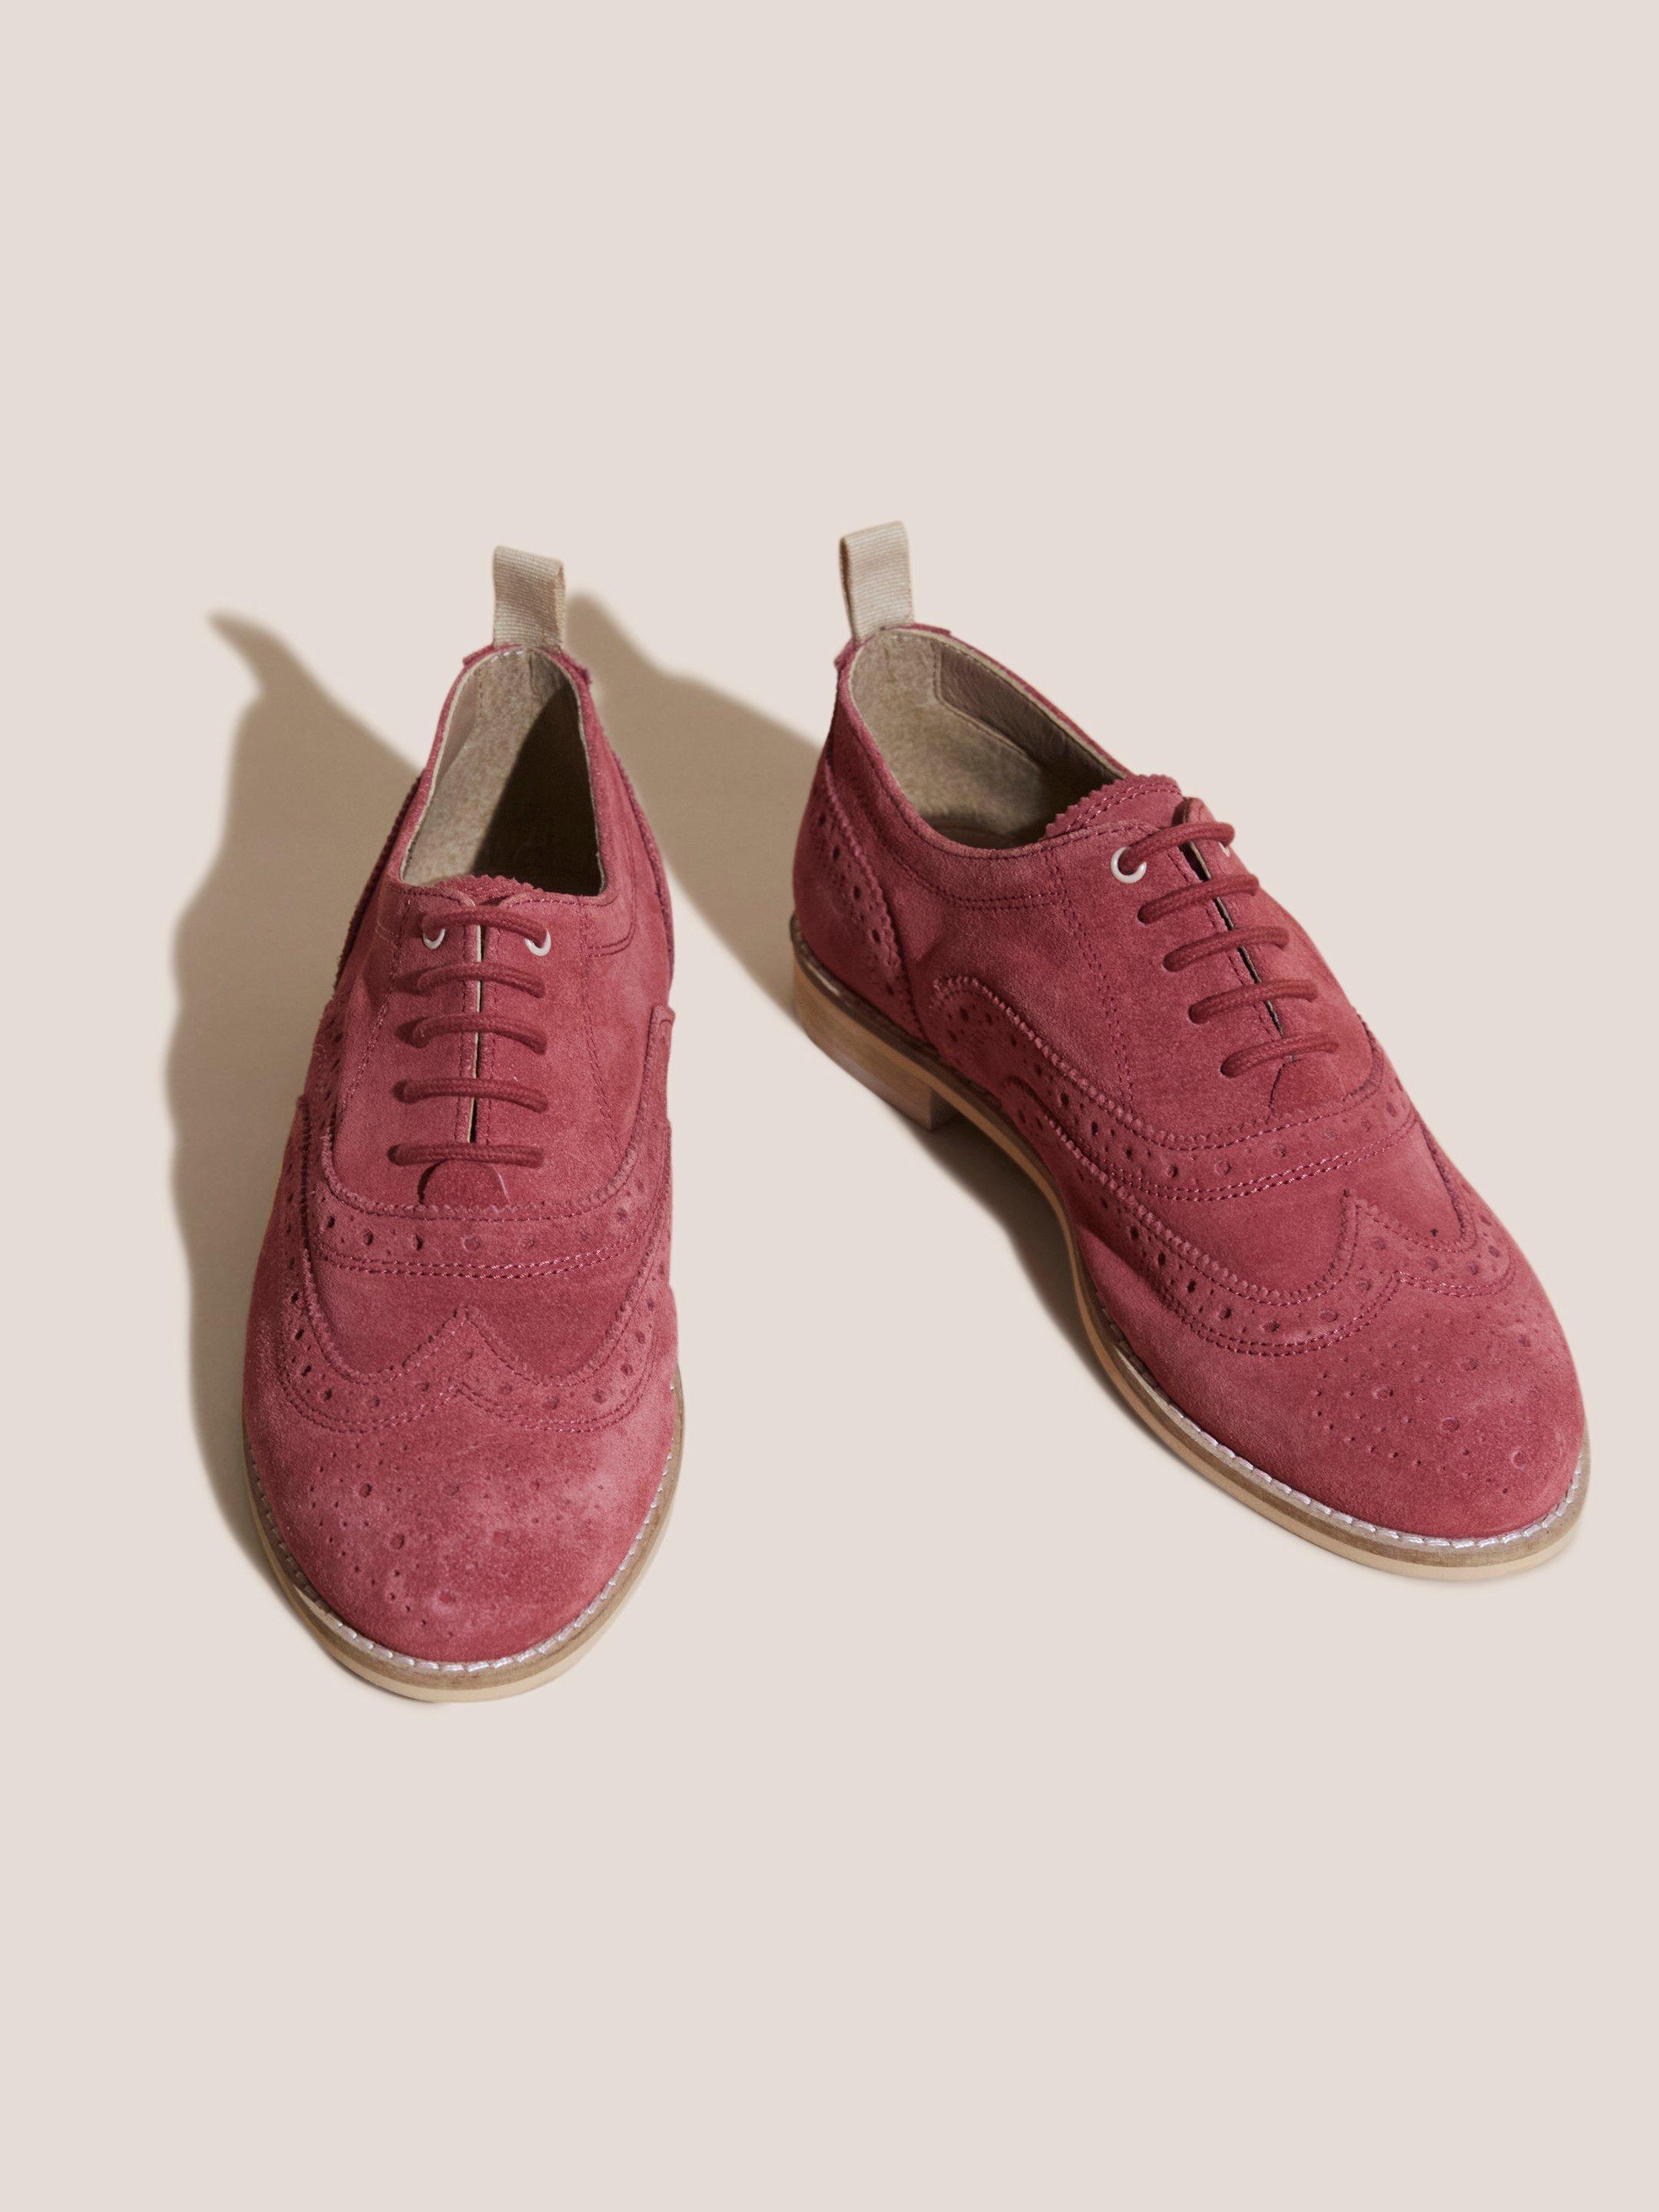 Thistle Lace Up Brogue in BRT PINK - FLAT FRONT